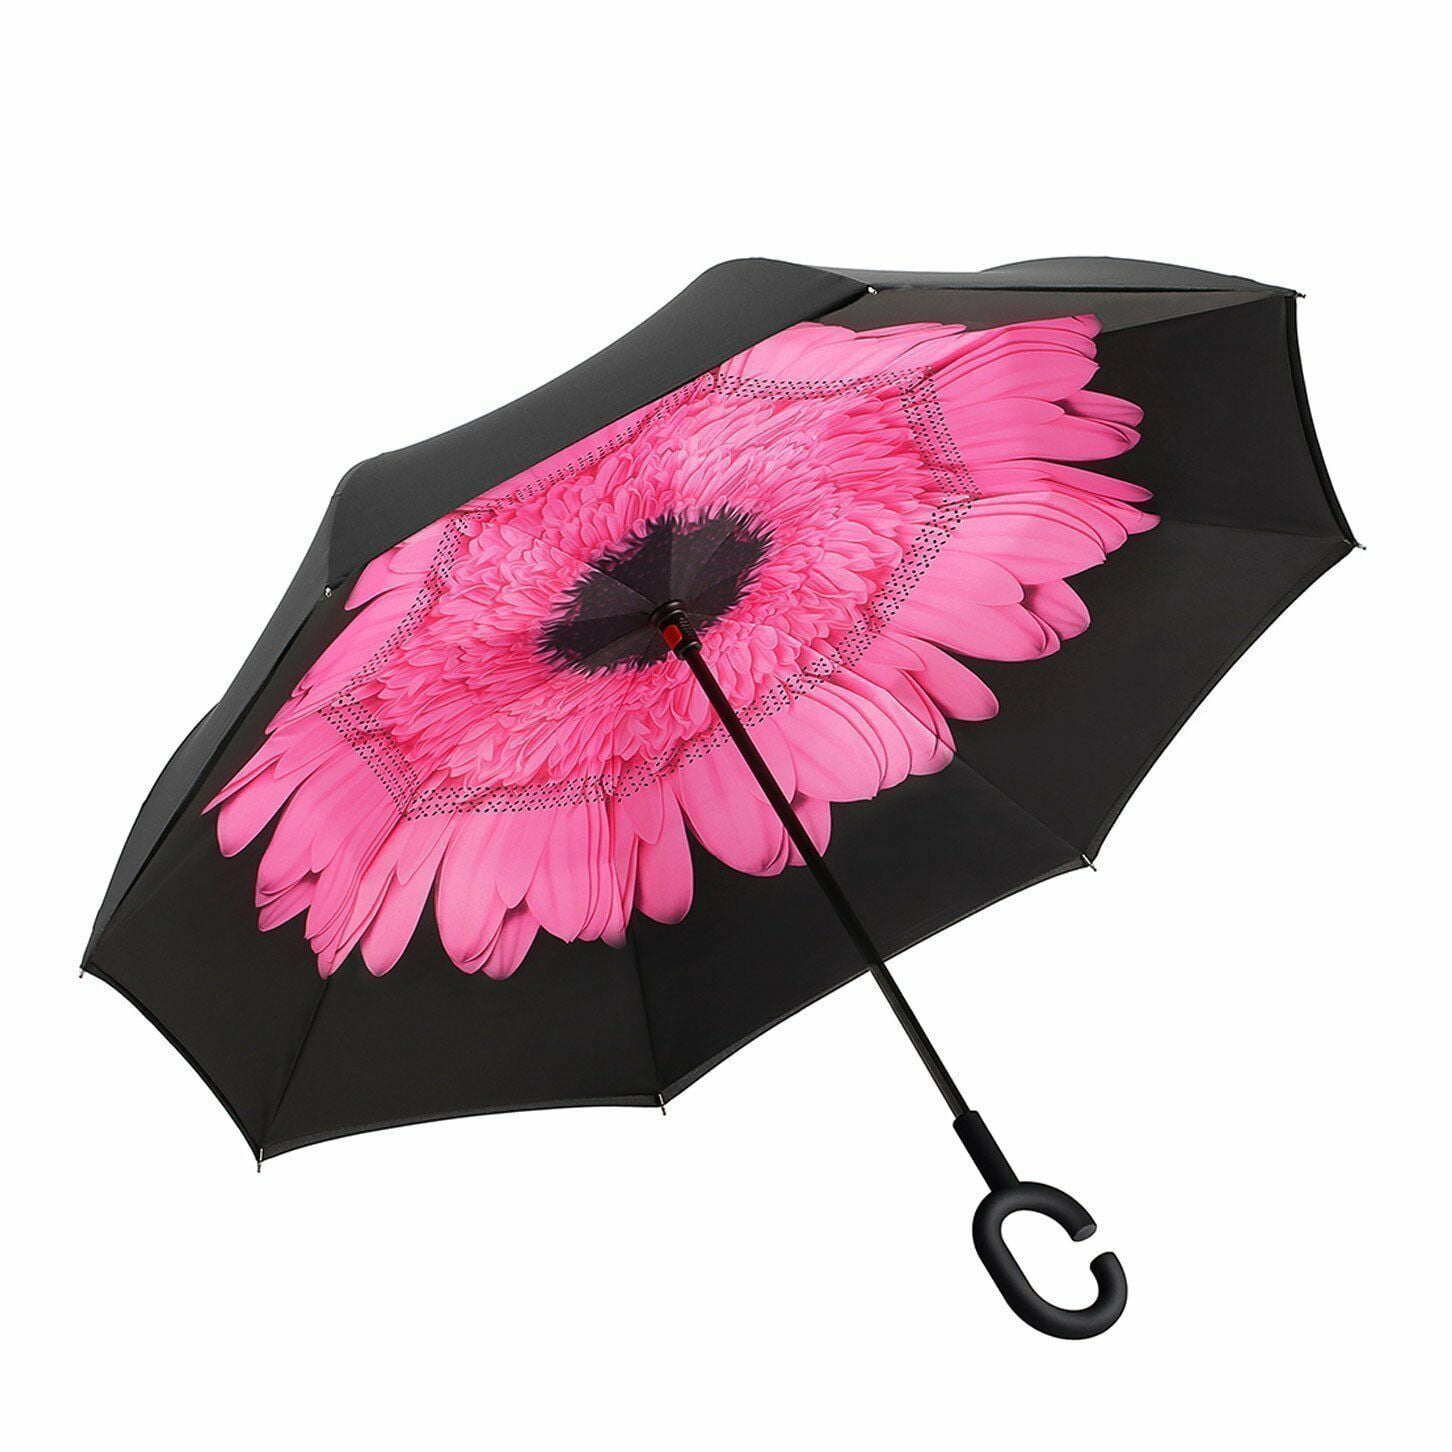 Double Layer Inverted Inverted Umbrella Is Light And Sturdy Bottlenose Dolphin Jumping High Bue Water Reverse Umbrella And Windproof Umbrella Edge Ni 